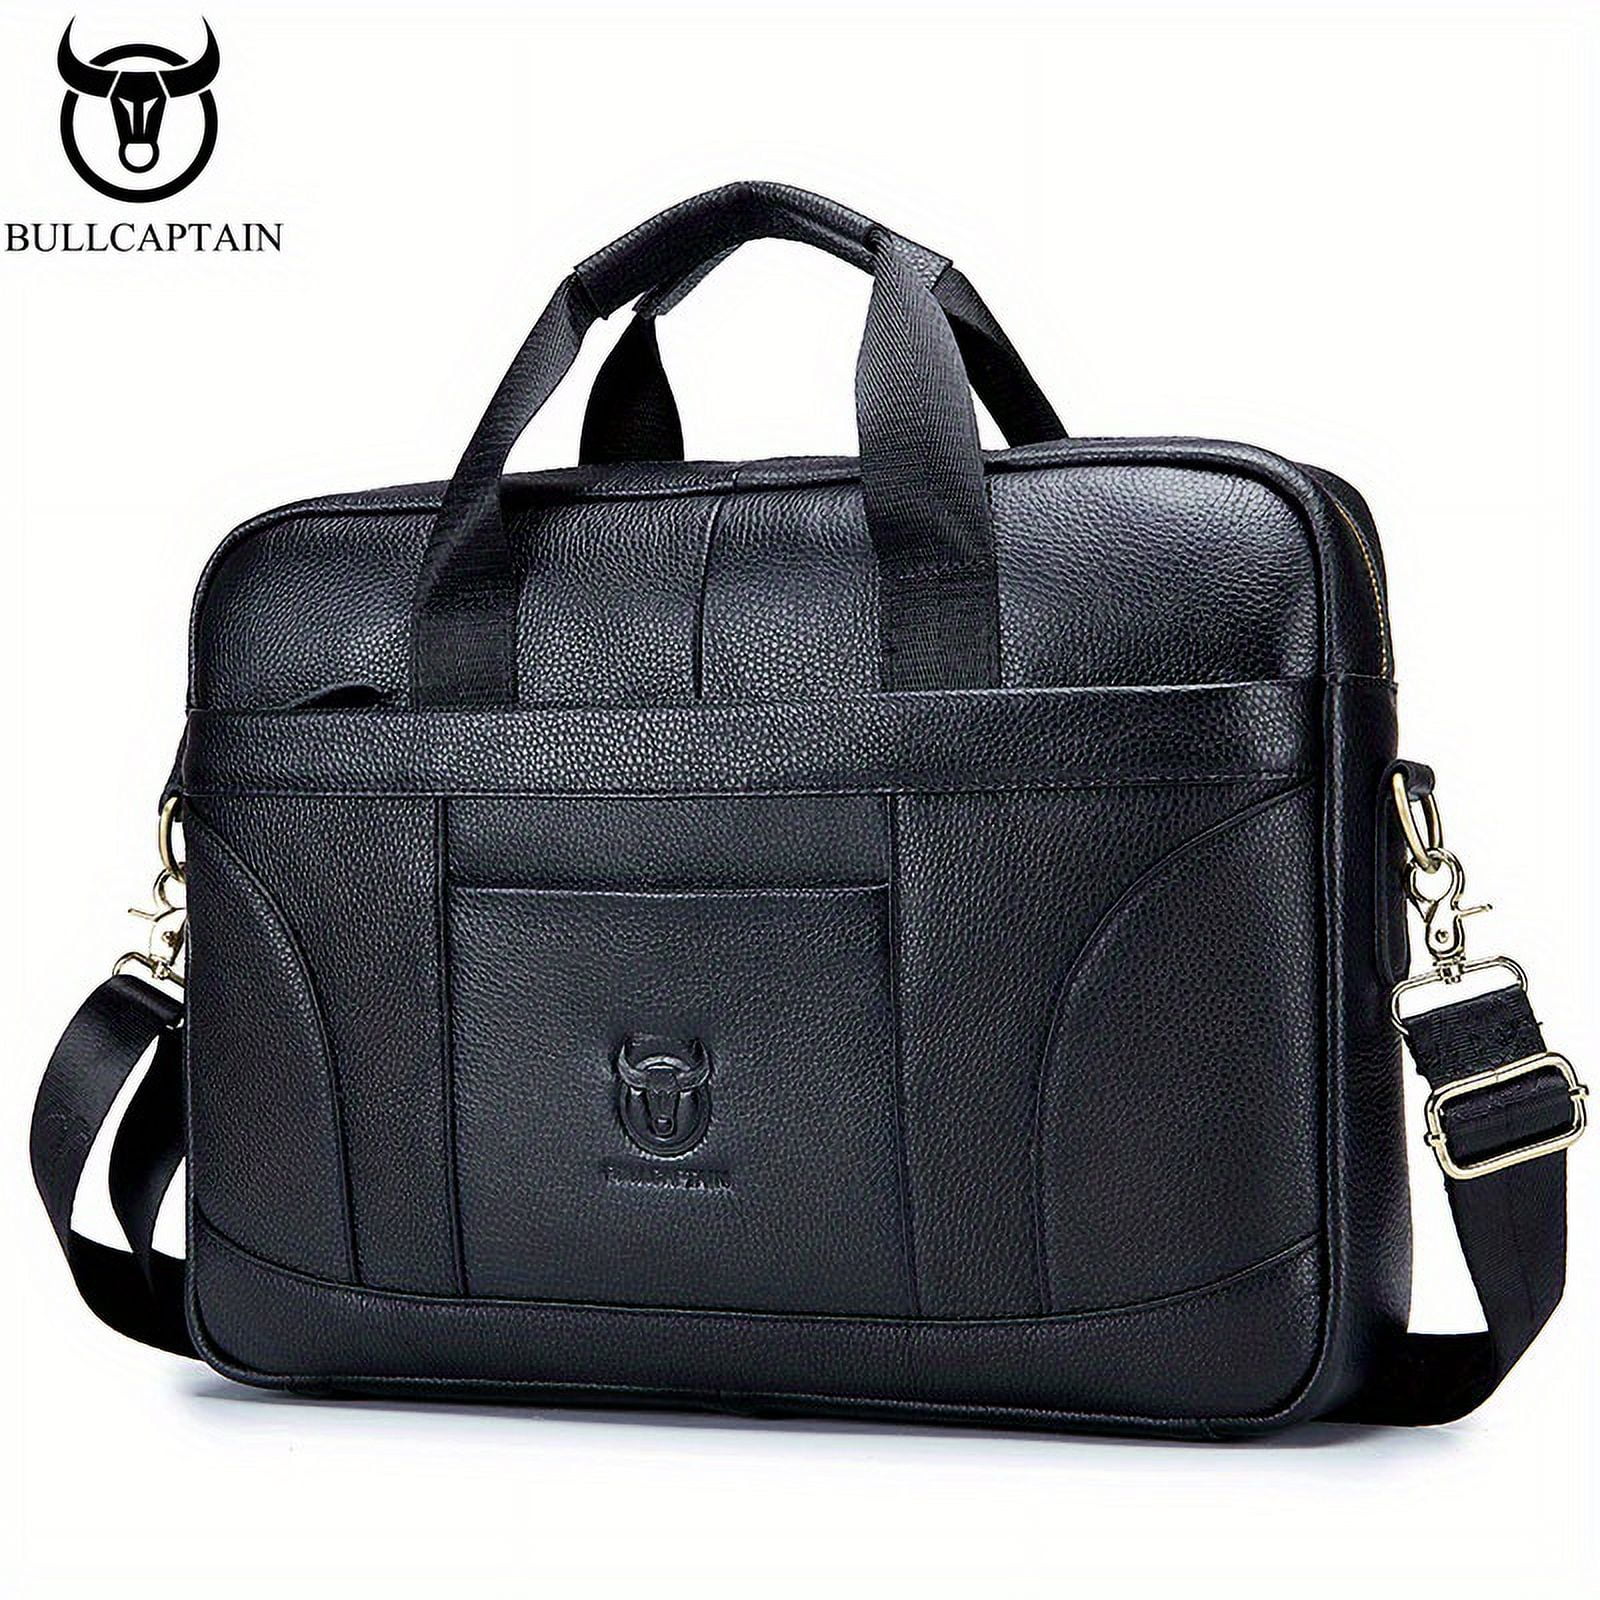 BULLCAPTAIN Men's Genuine Leather Large Capacity Business Briefcase ...